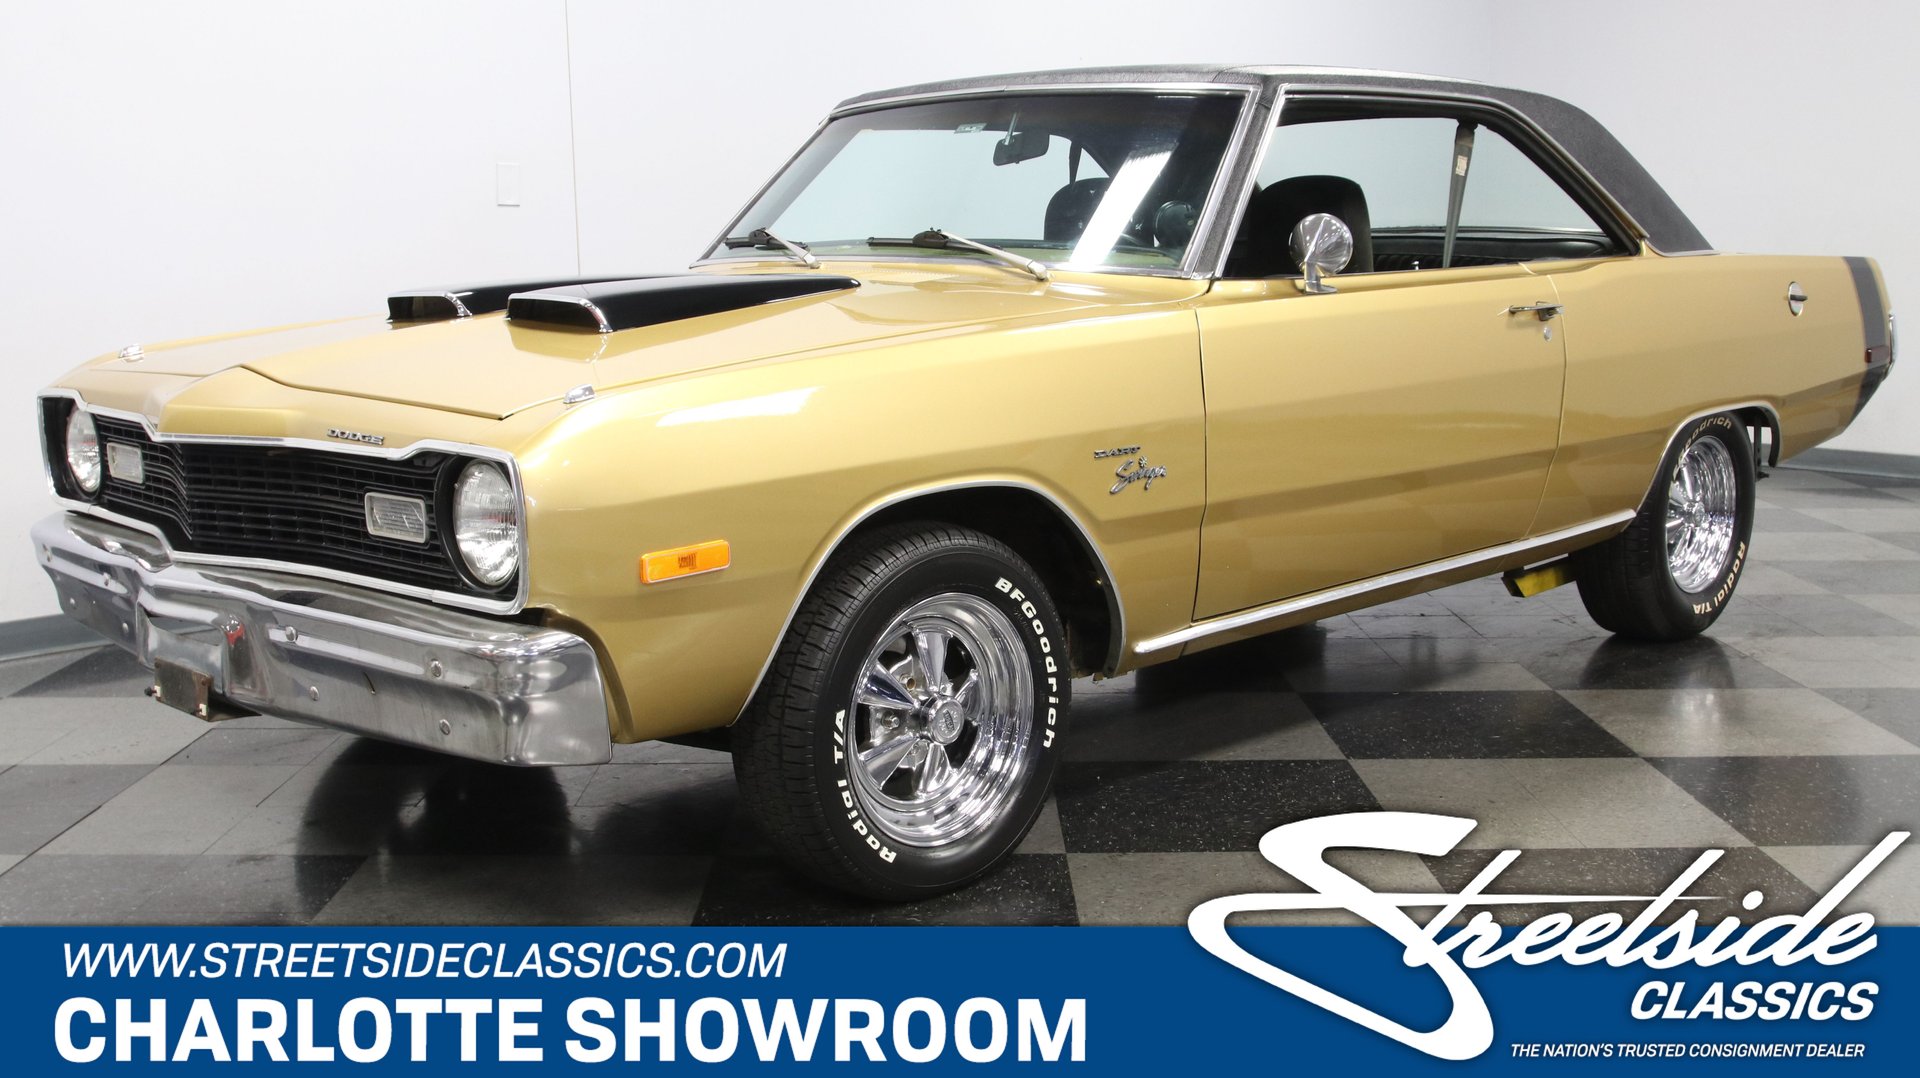 1973 Dodge Dart Classic Cars for Sale photo pic